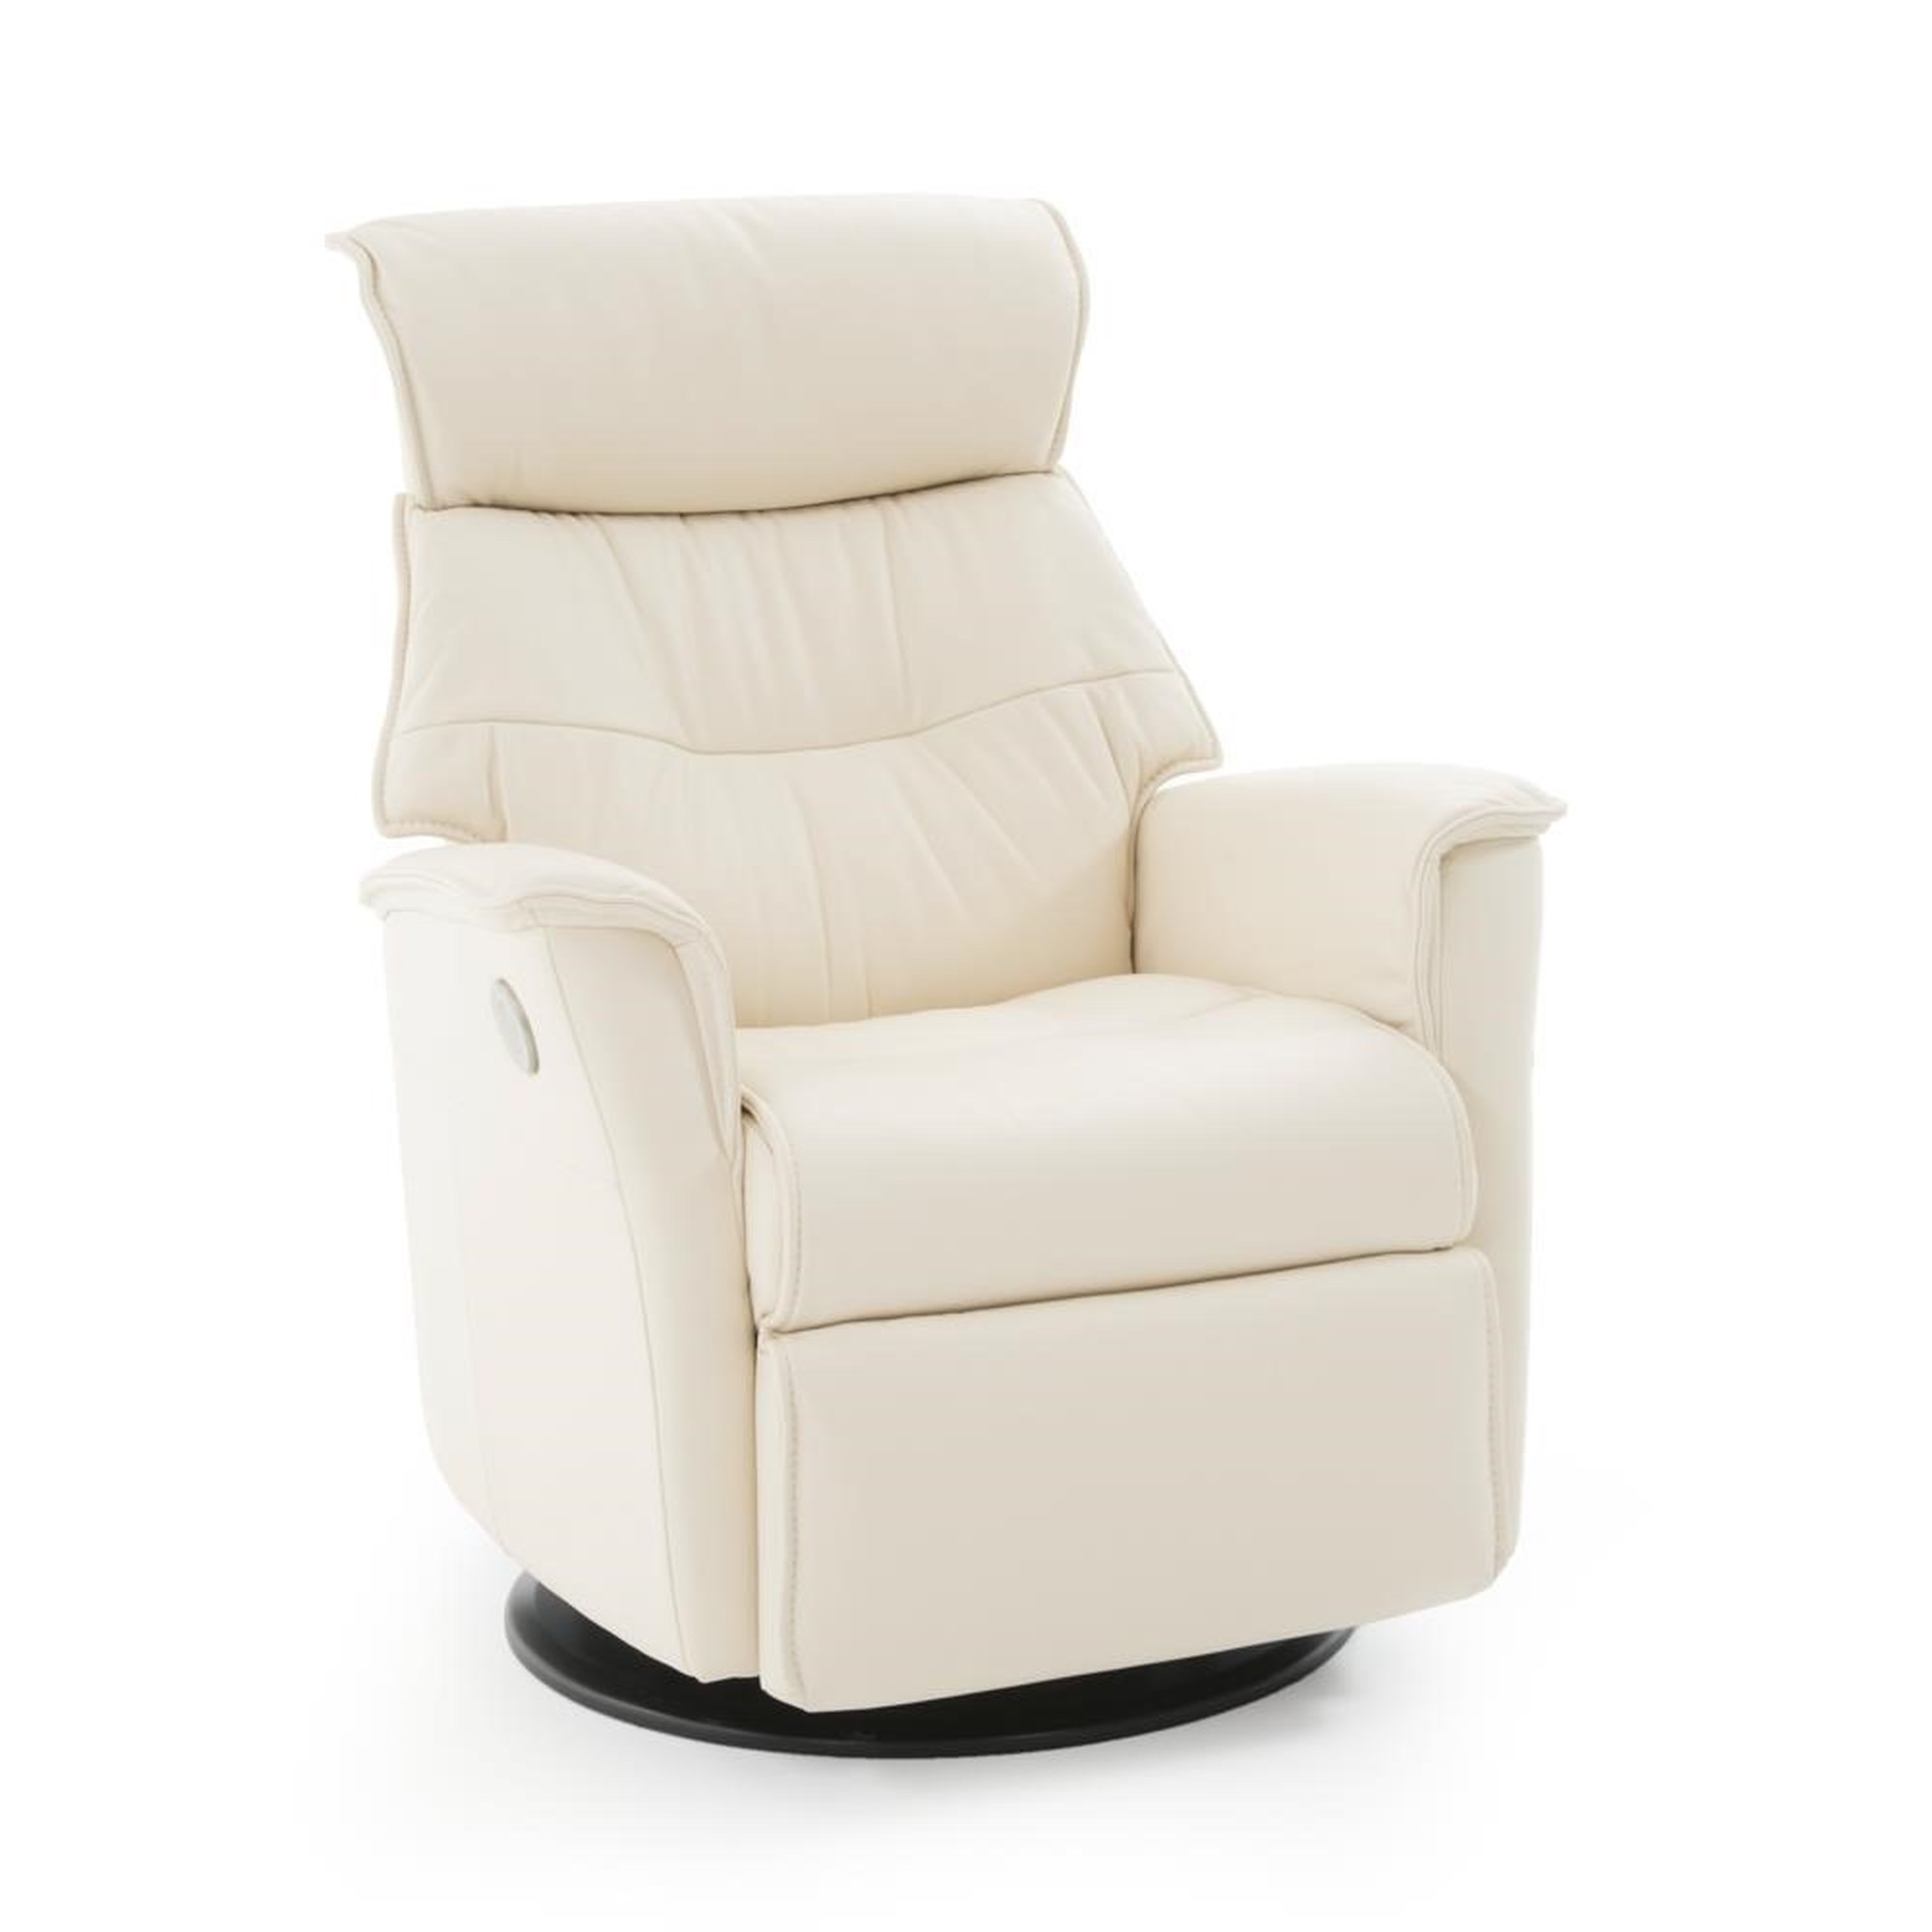 IMG Norway Captain 151179972 Standard Size Contemporary Recliner with  Swivel Glider Base, Baer's Furniture